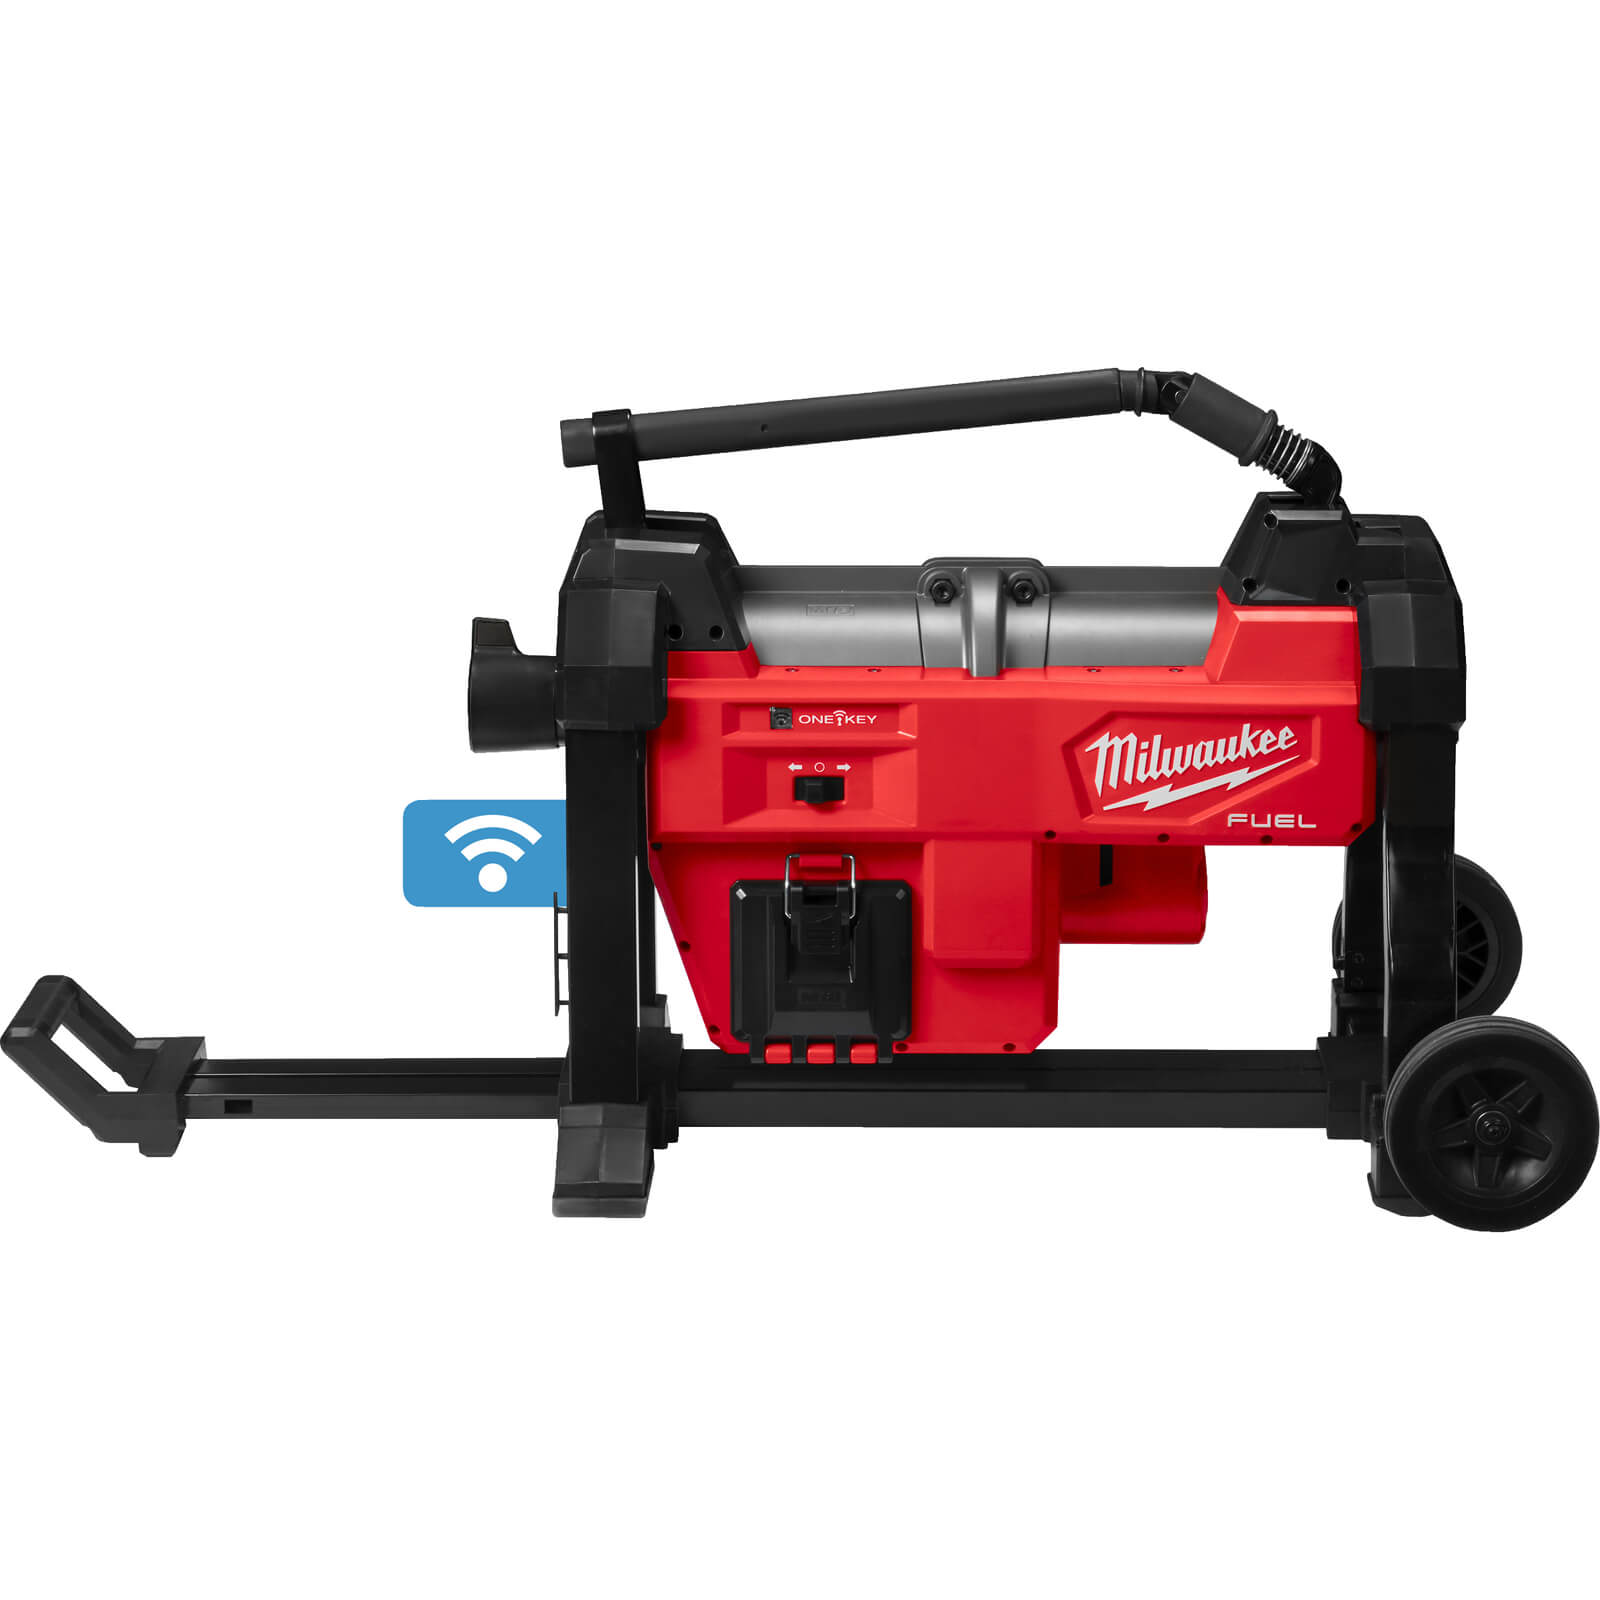 Milwaukee M18 FSSM Fuel 18v Cordless Brushless Sectional Sewer Machine No Batteries No Charger No Case